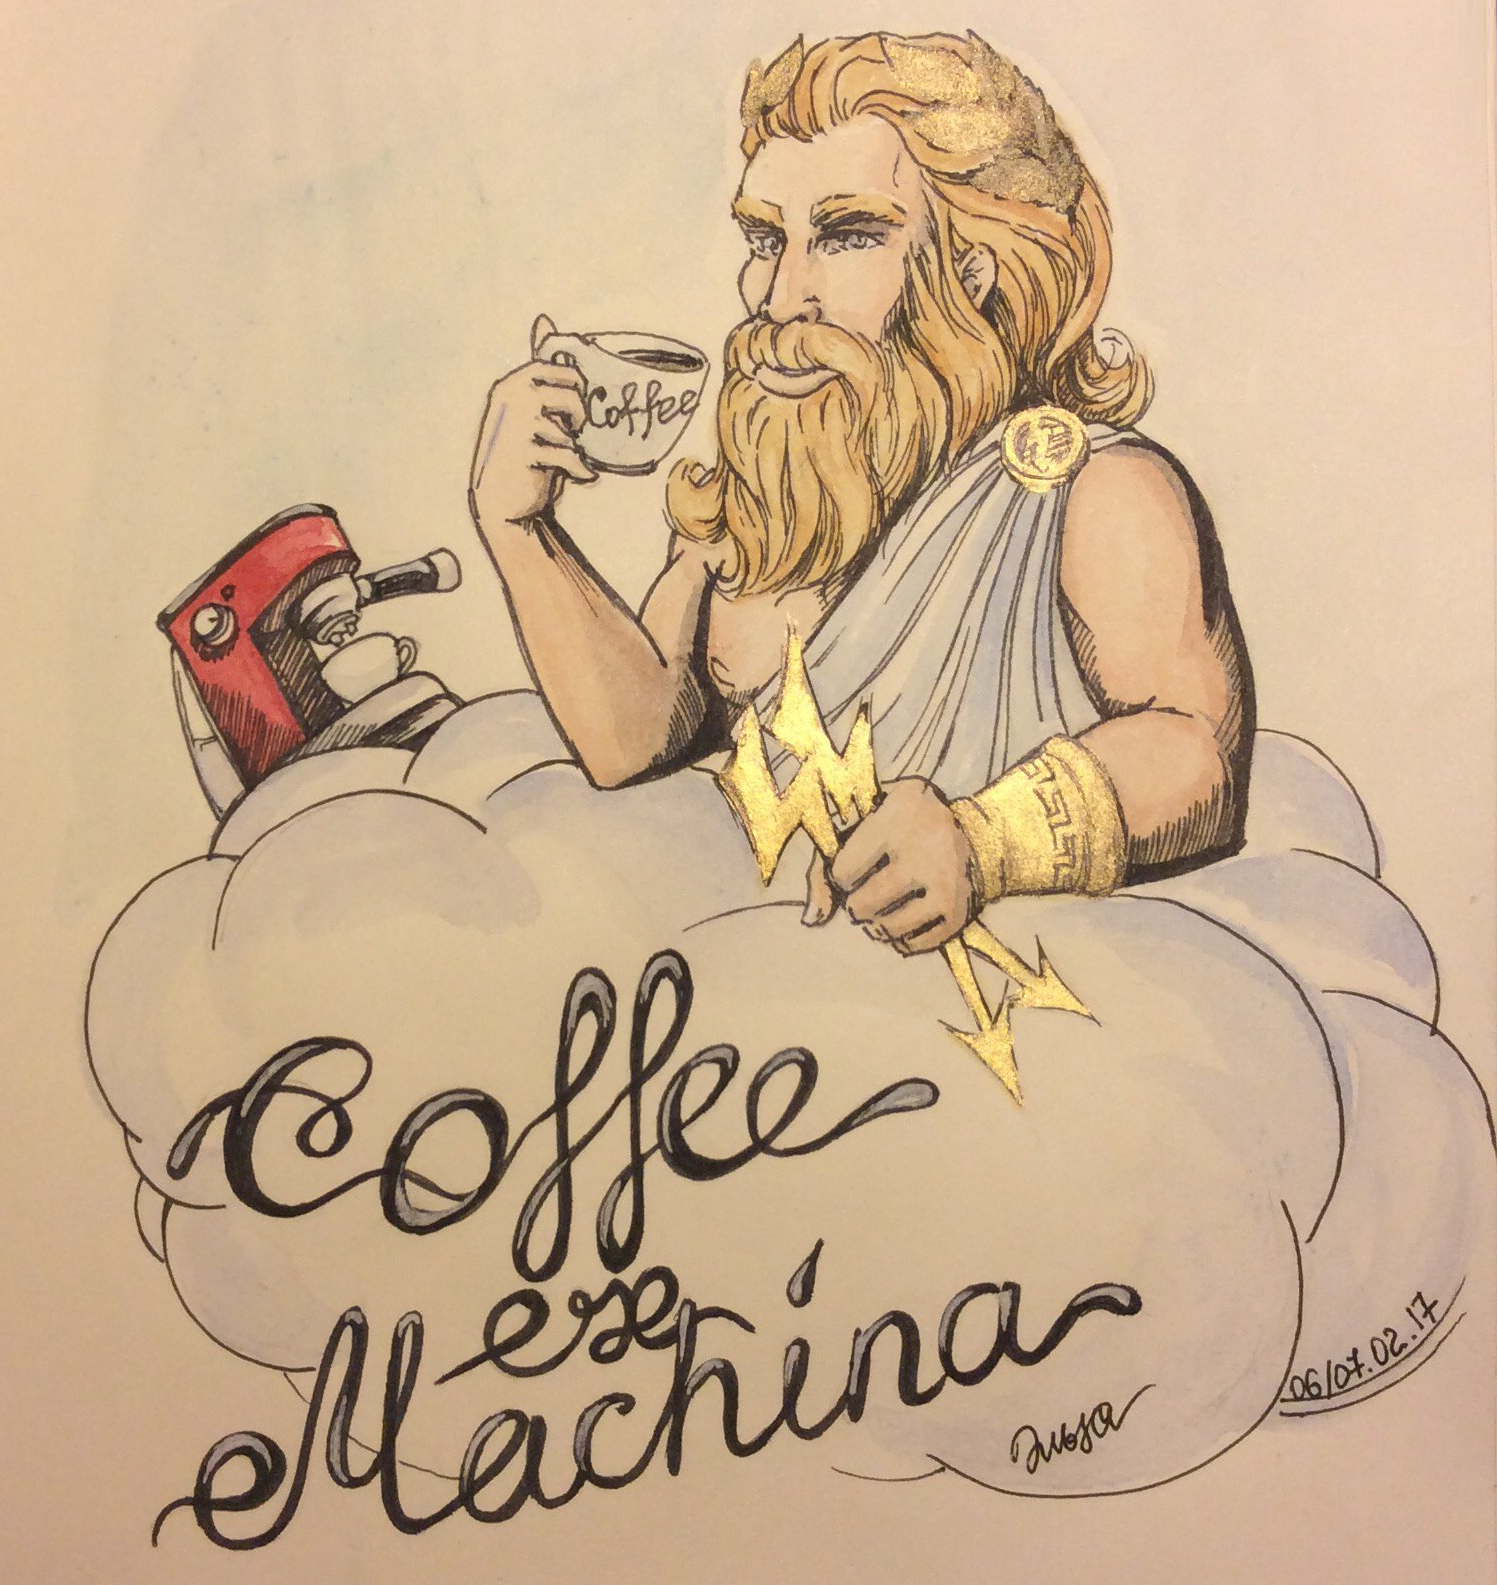 Good morning to those who have morning now) - My, Coffee, Morning, Good morning, Coffee machine, Watercolor, Drawing, Art